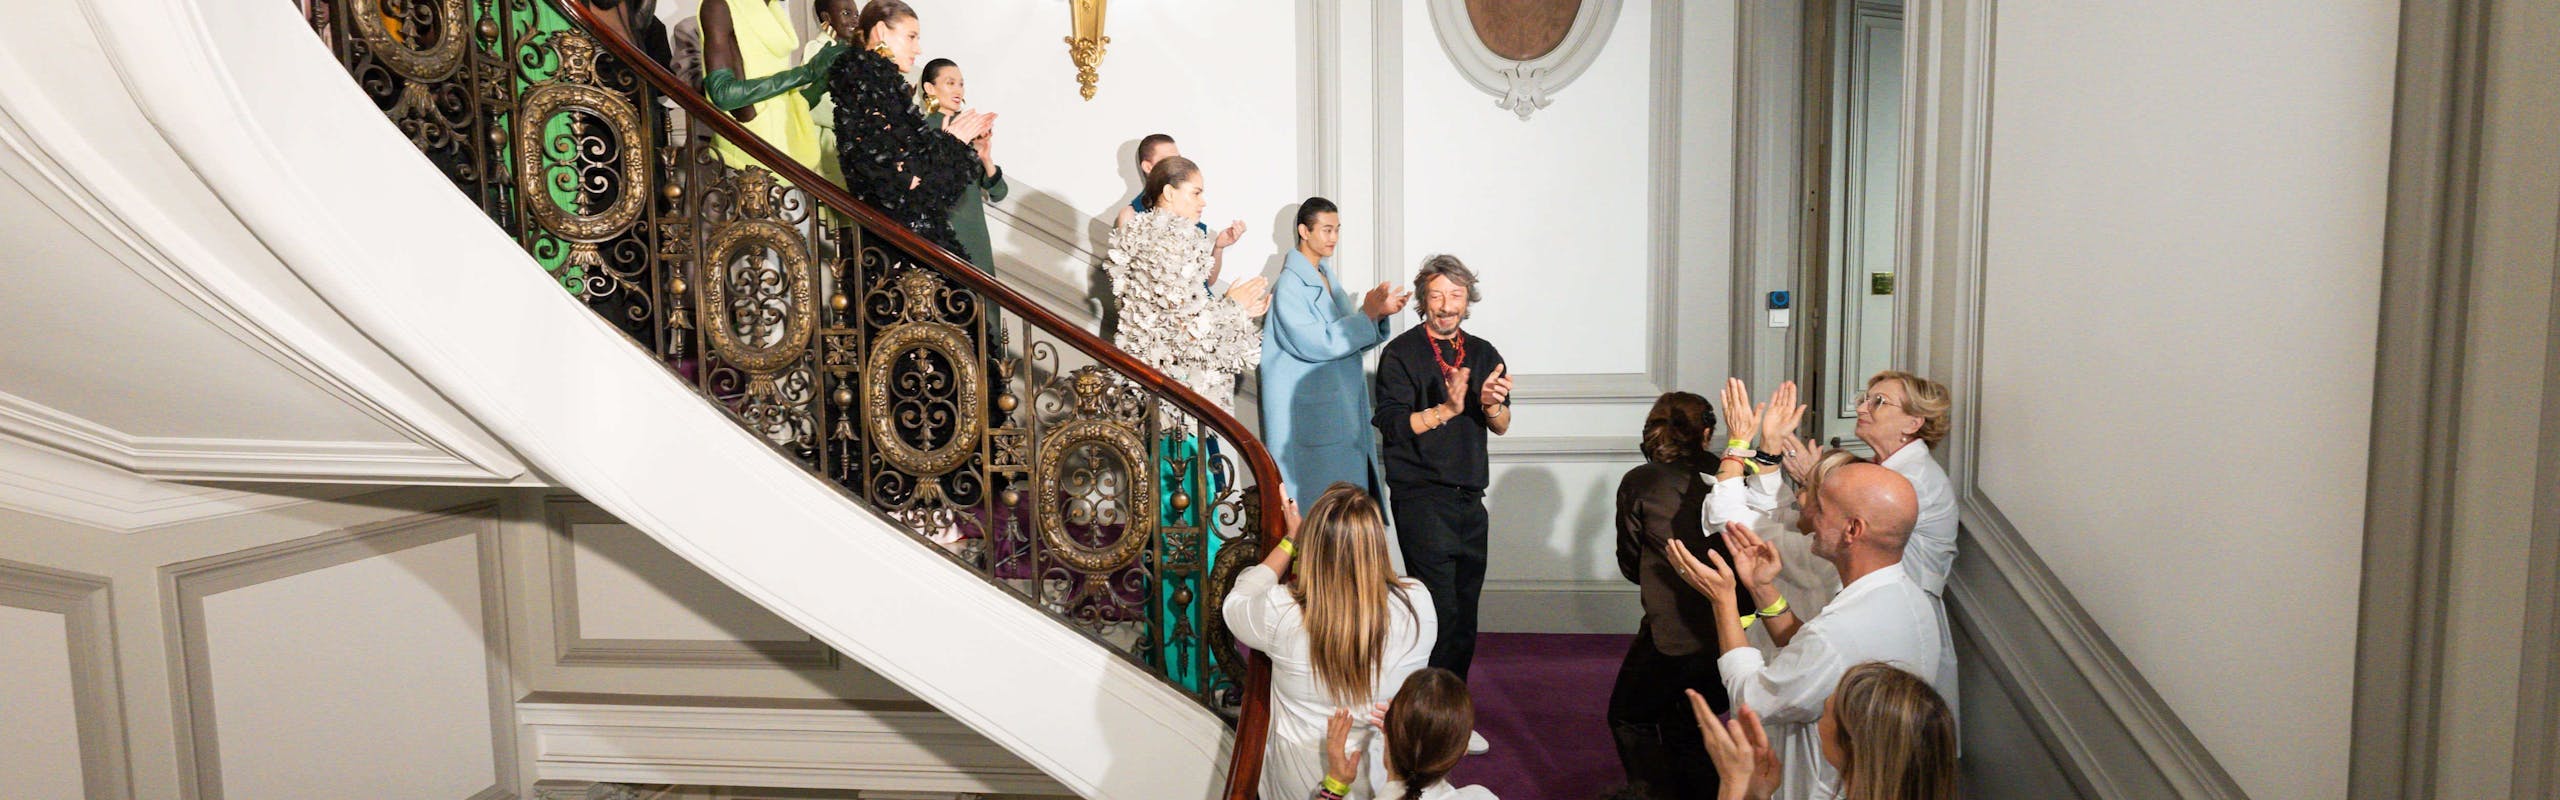 Models on the stairs of the Valentino salon.